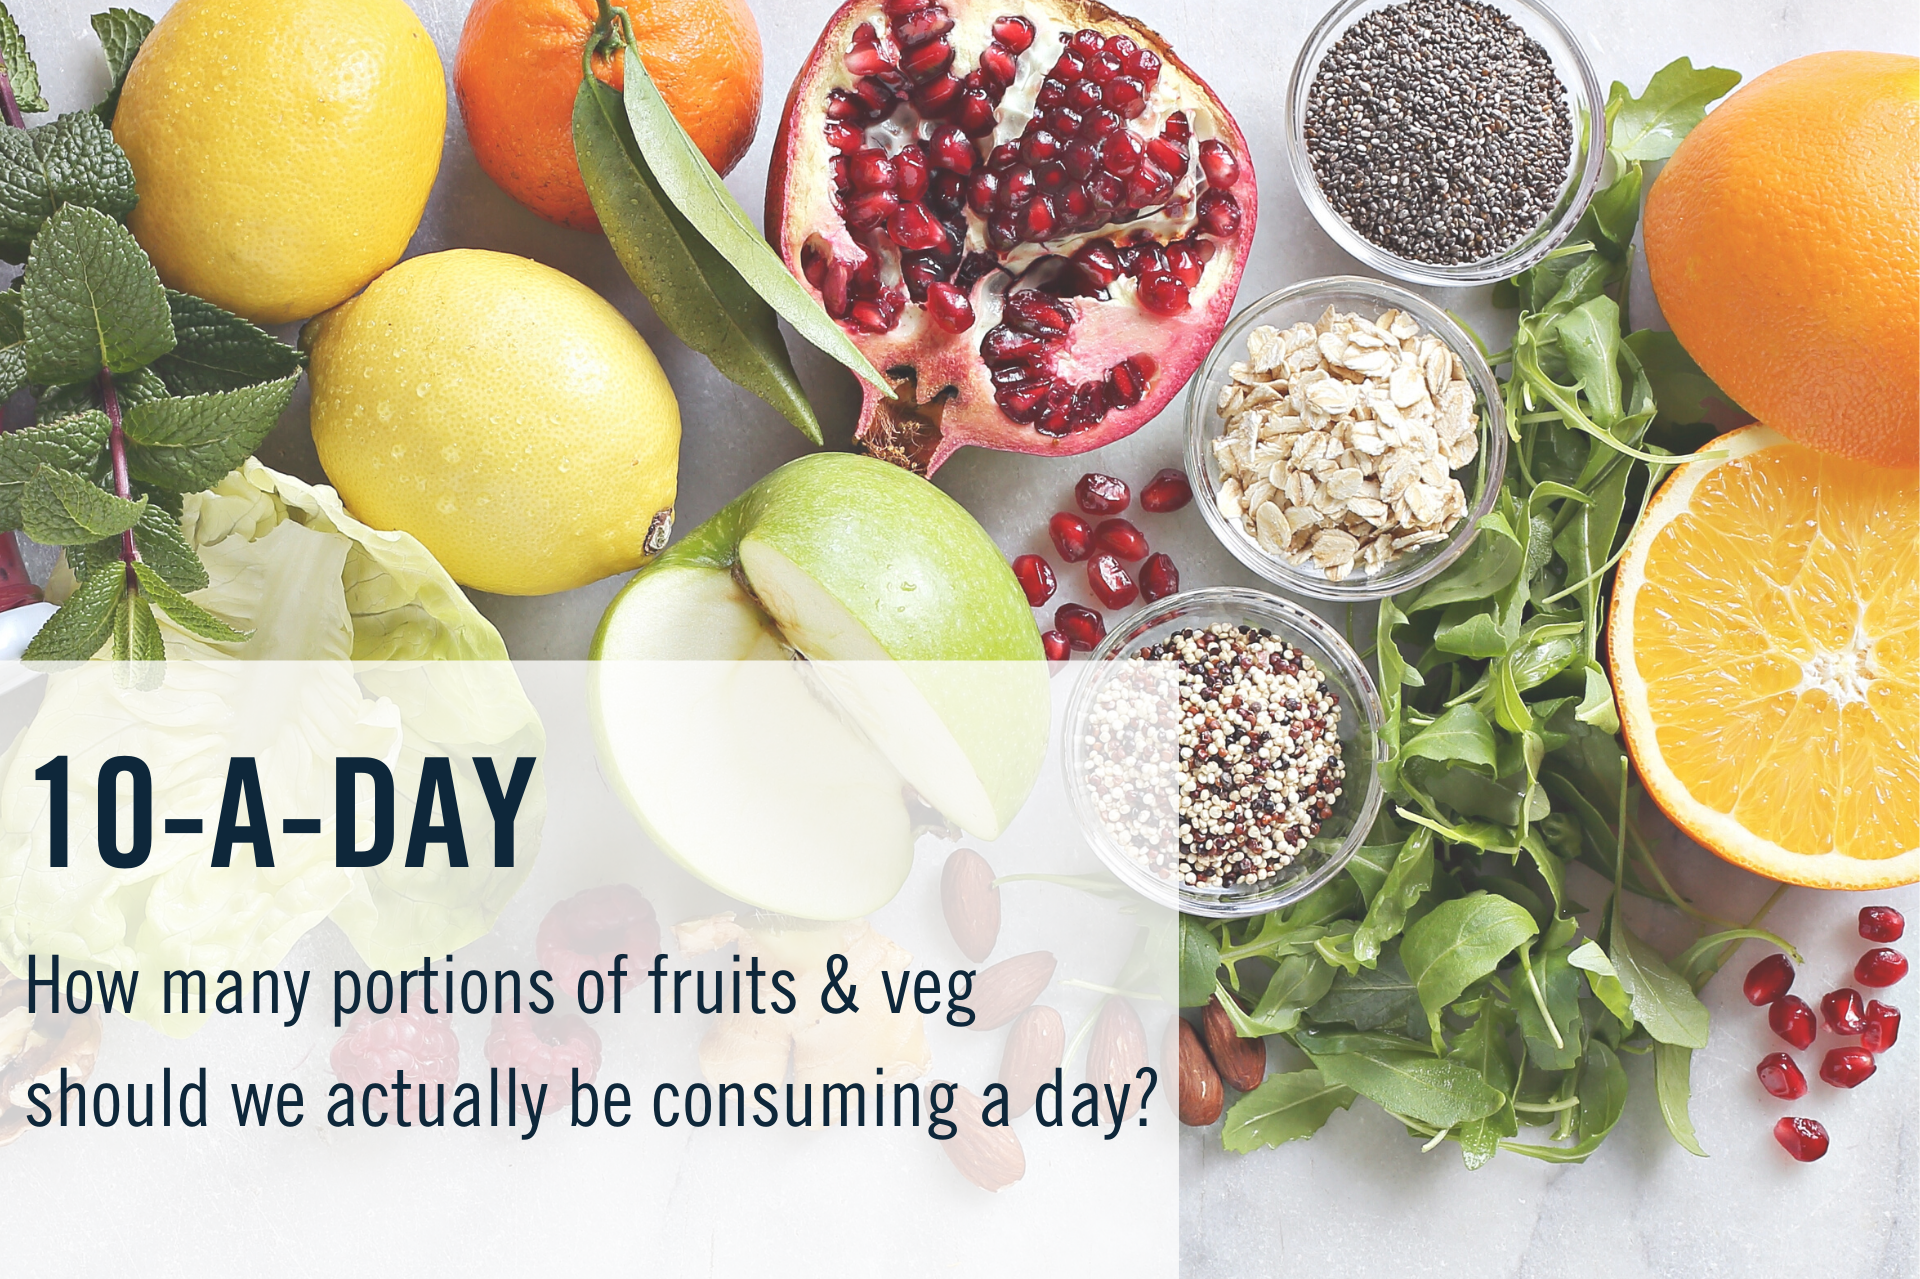 How many portions of fruit & veg should we be consuming a day?